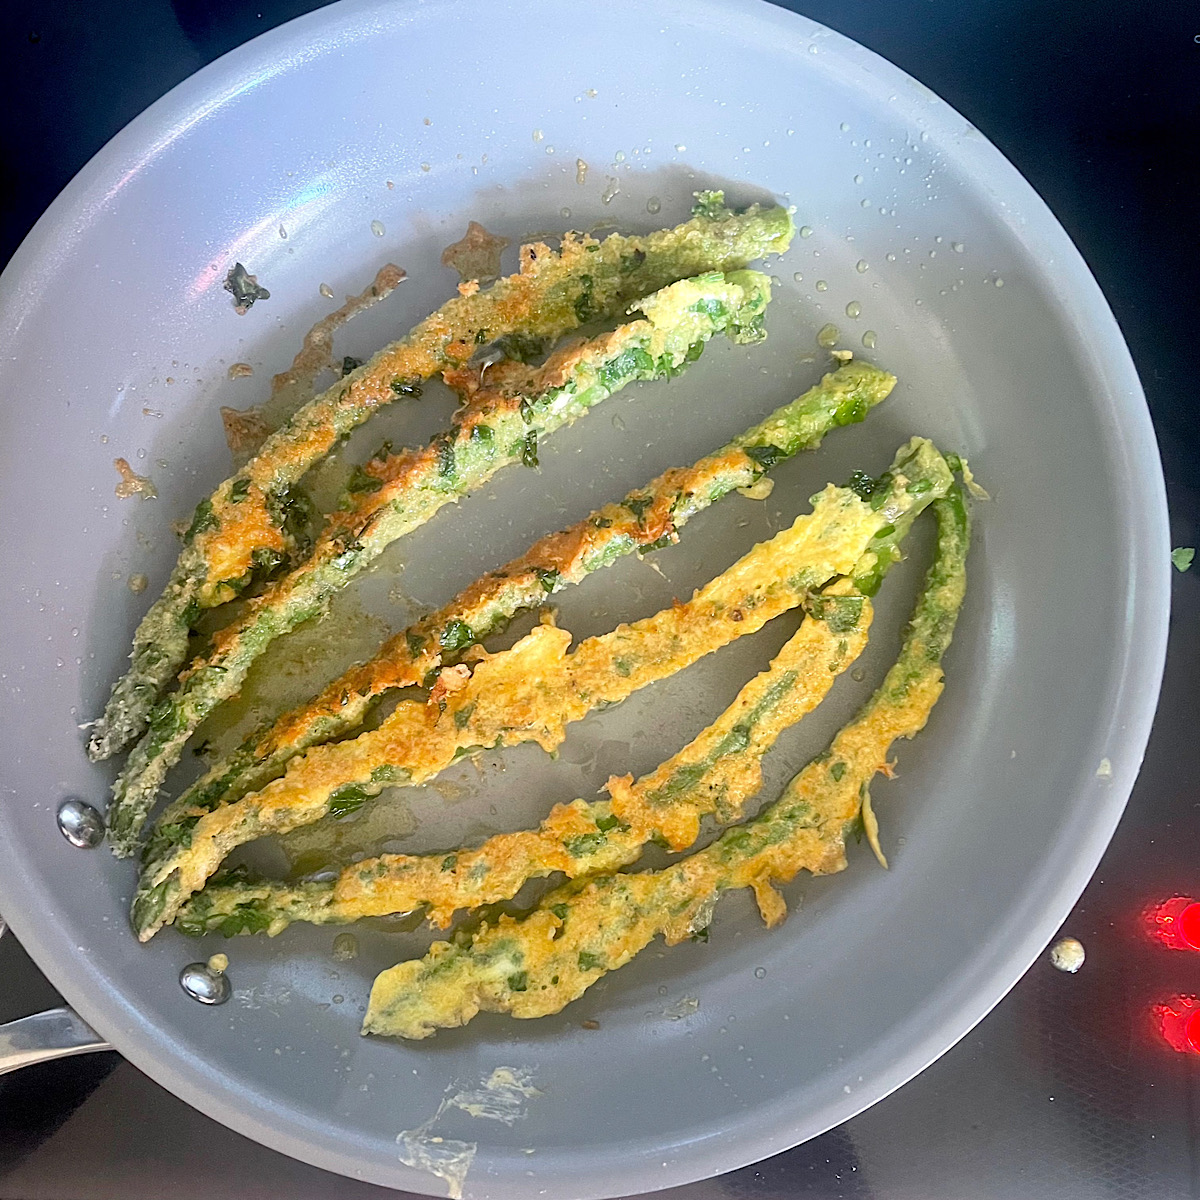 Fresh asparagus spears in a batter fried in a pan.